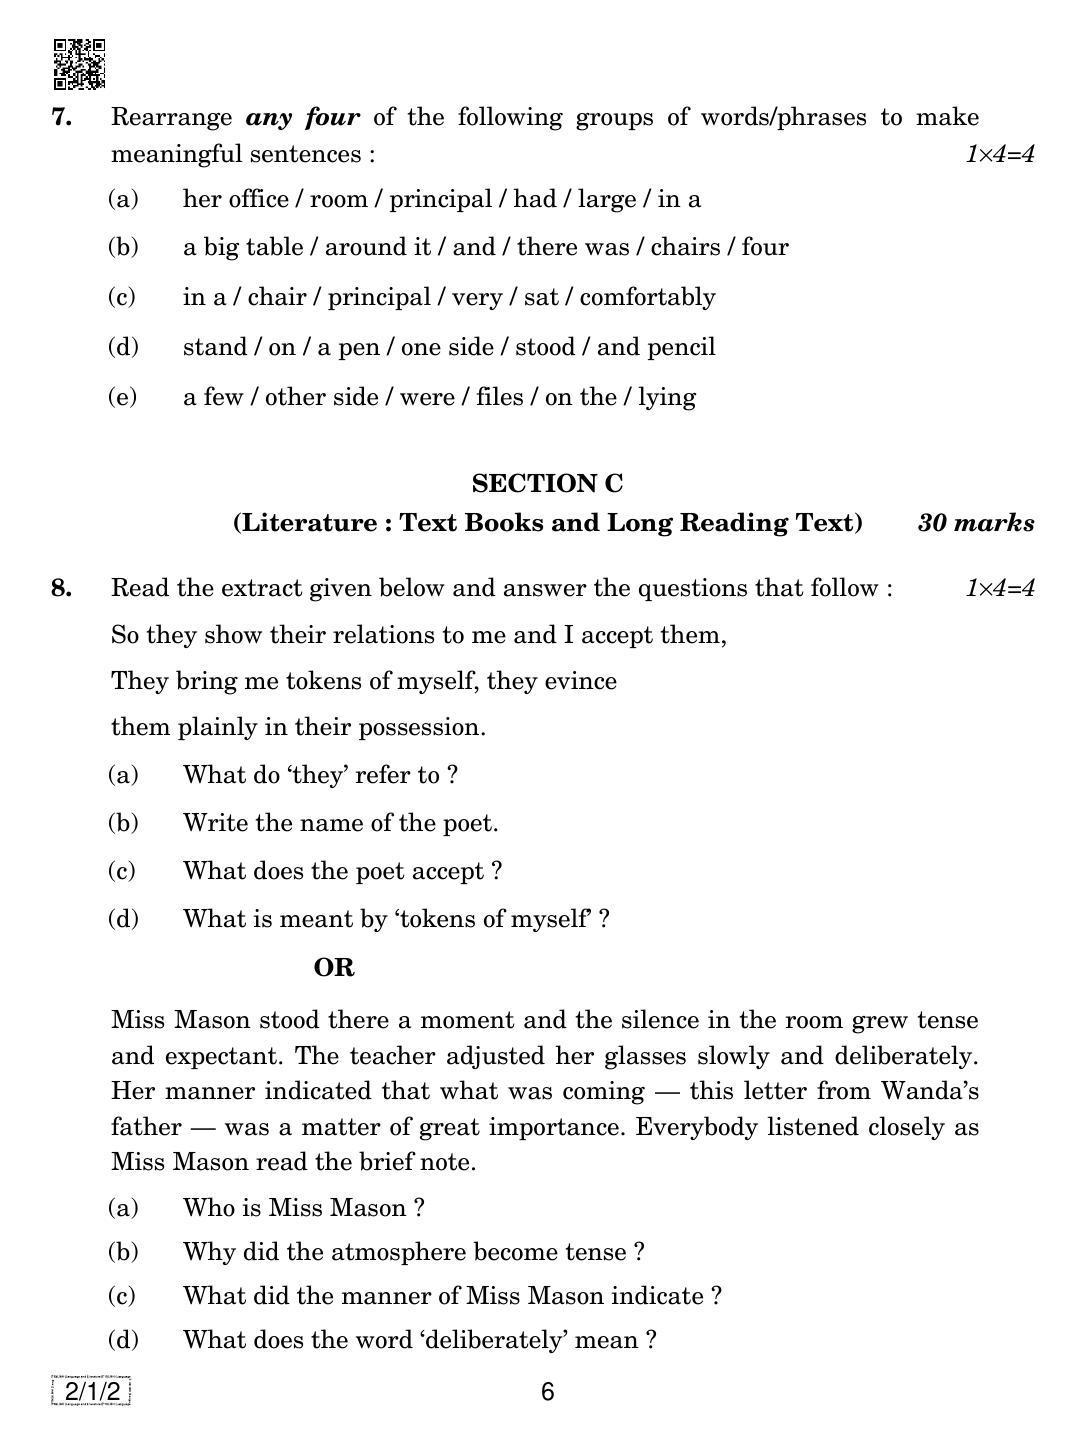 CBSE Class 10 2-1-2 ENGLISH LANG. & LIT. 2019 Compartment Question Paper - Page 6